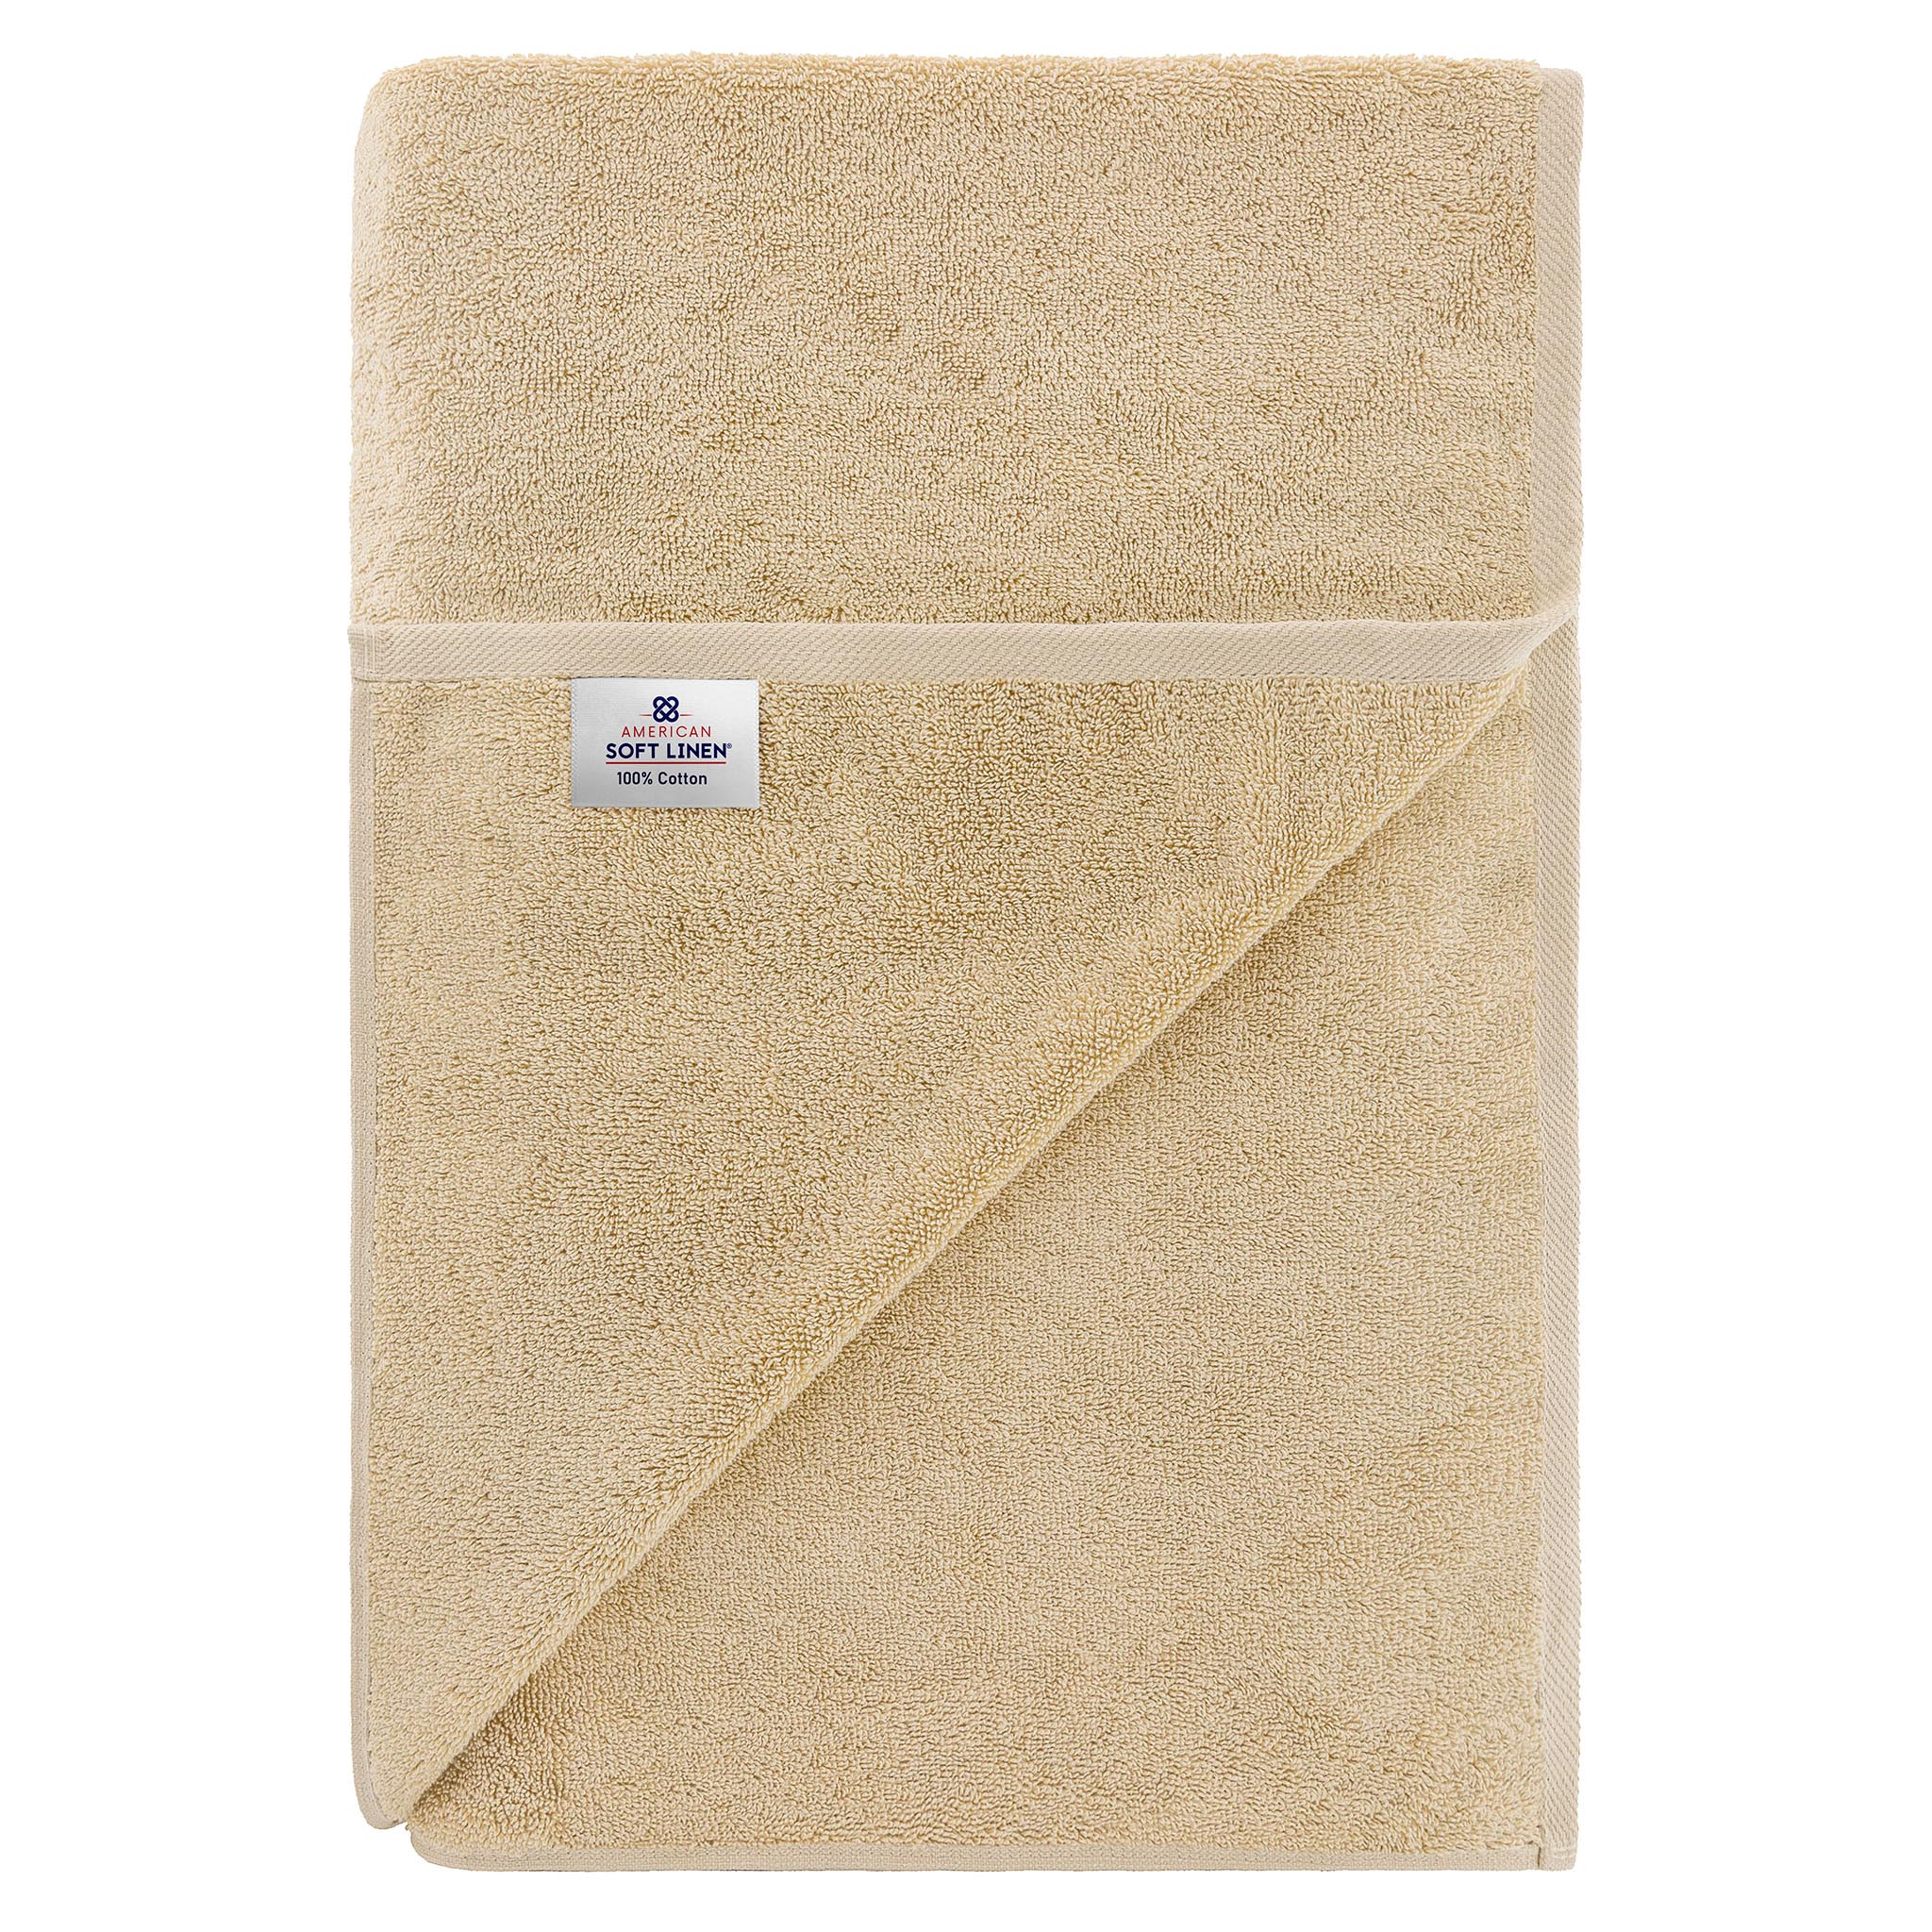 American Soft Linen 100% Ring Spun Cotton 40x80 Inches Oversized Bath Sheets sand-taupe-7